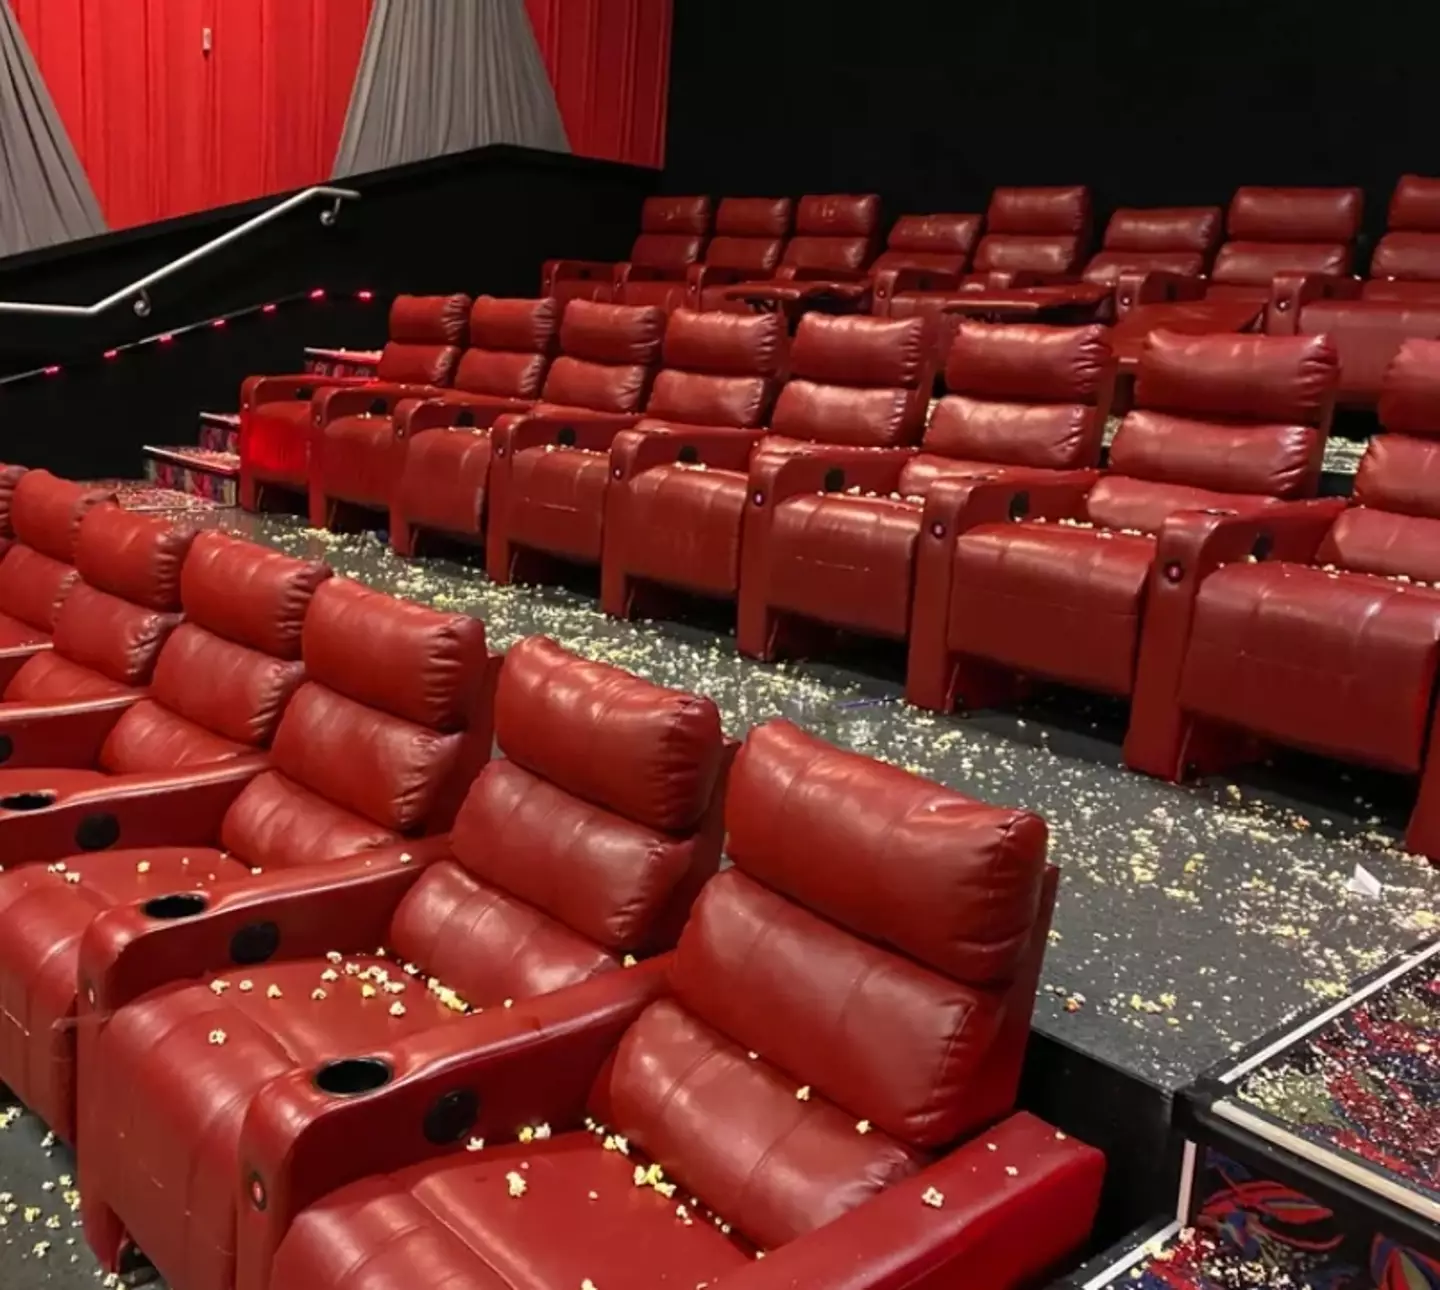 They didn't even stay until the end of the film, it's like they just wanted a food fight and didn't care that someone else would have to clean it up.